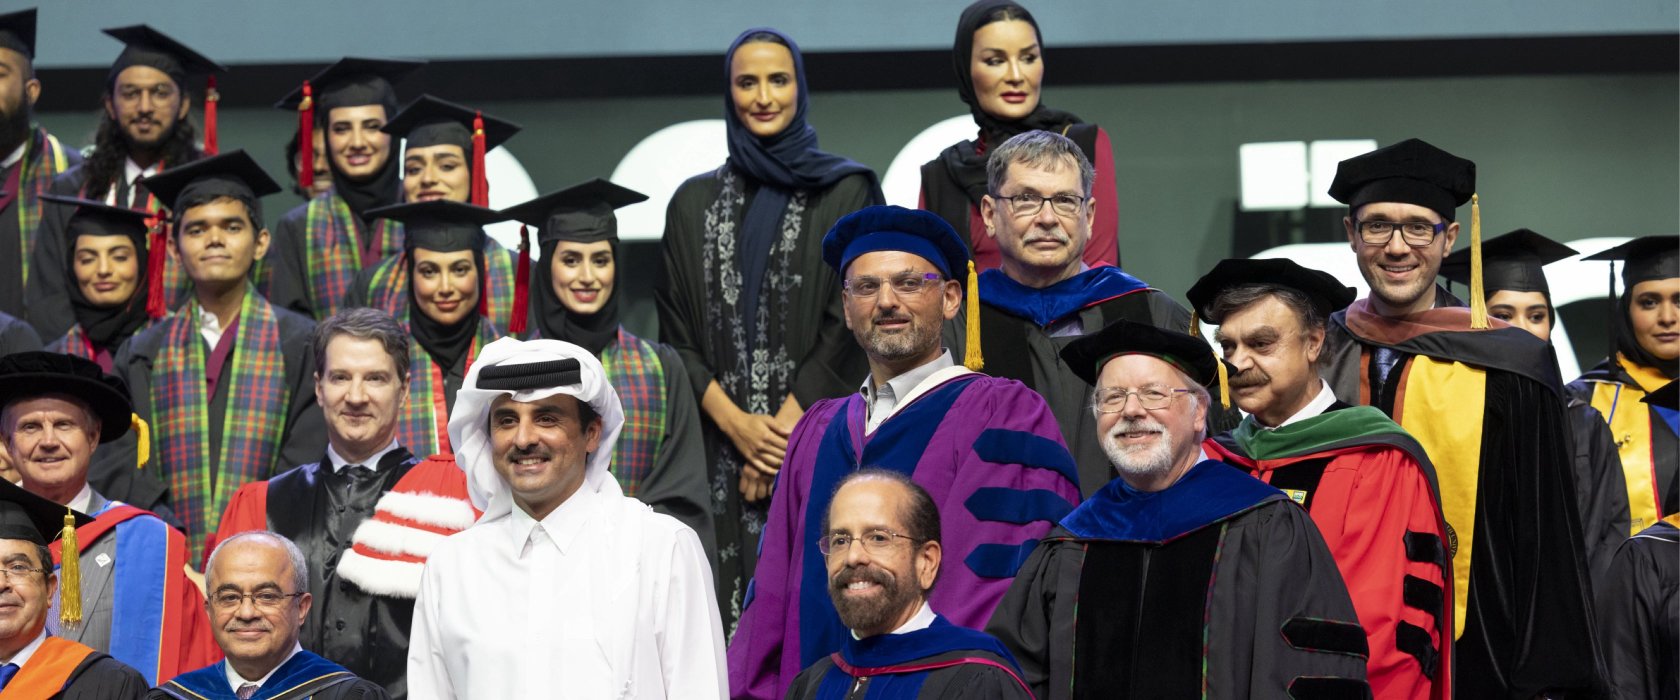 His Highness the Amir of Qatar attends QF’s Convocation ceremony